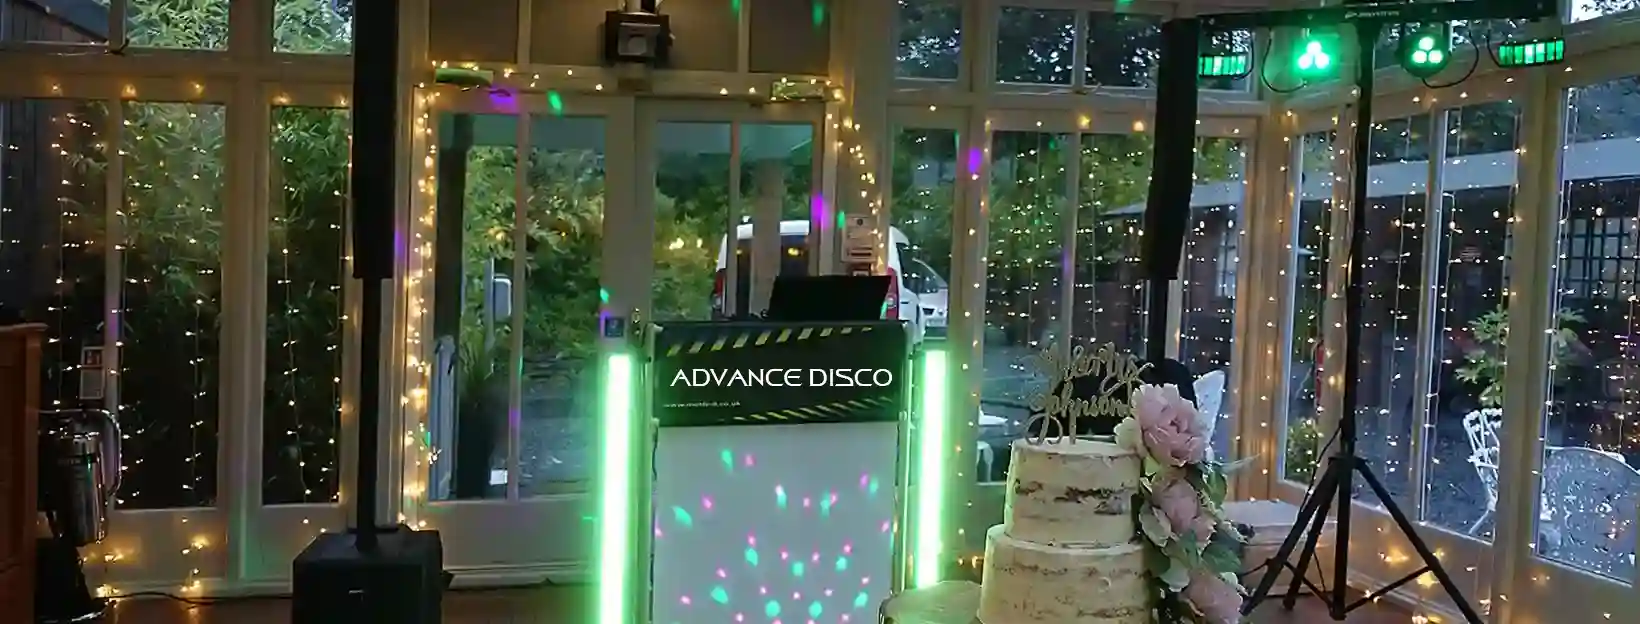 Advance disco with reduced foot print